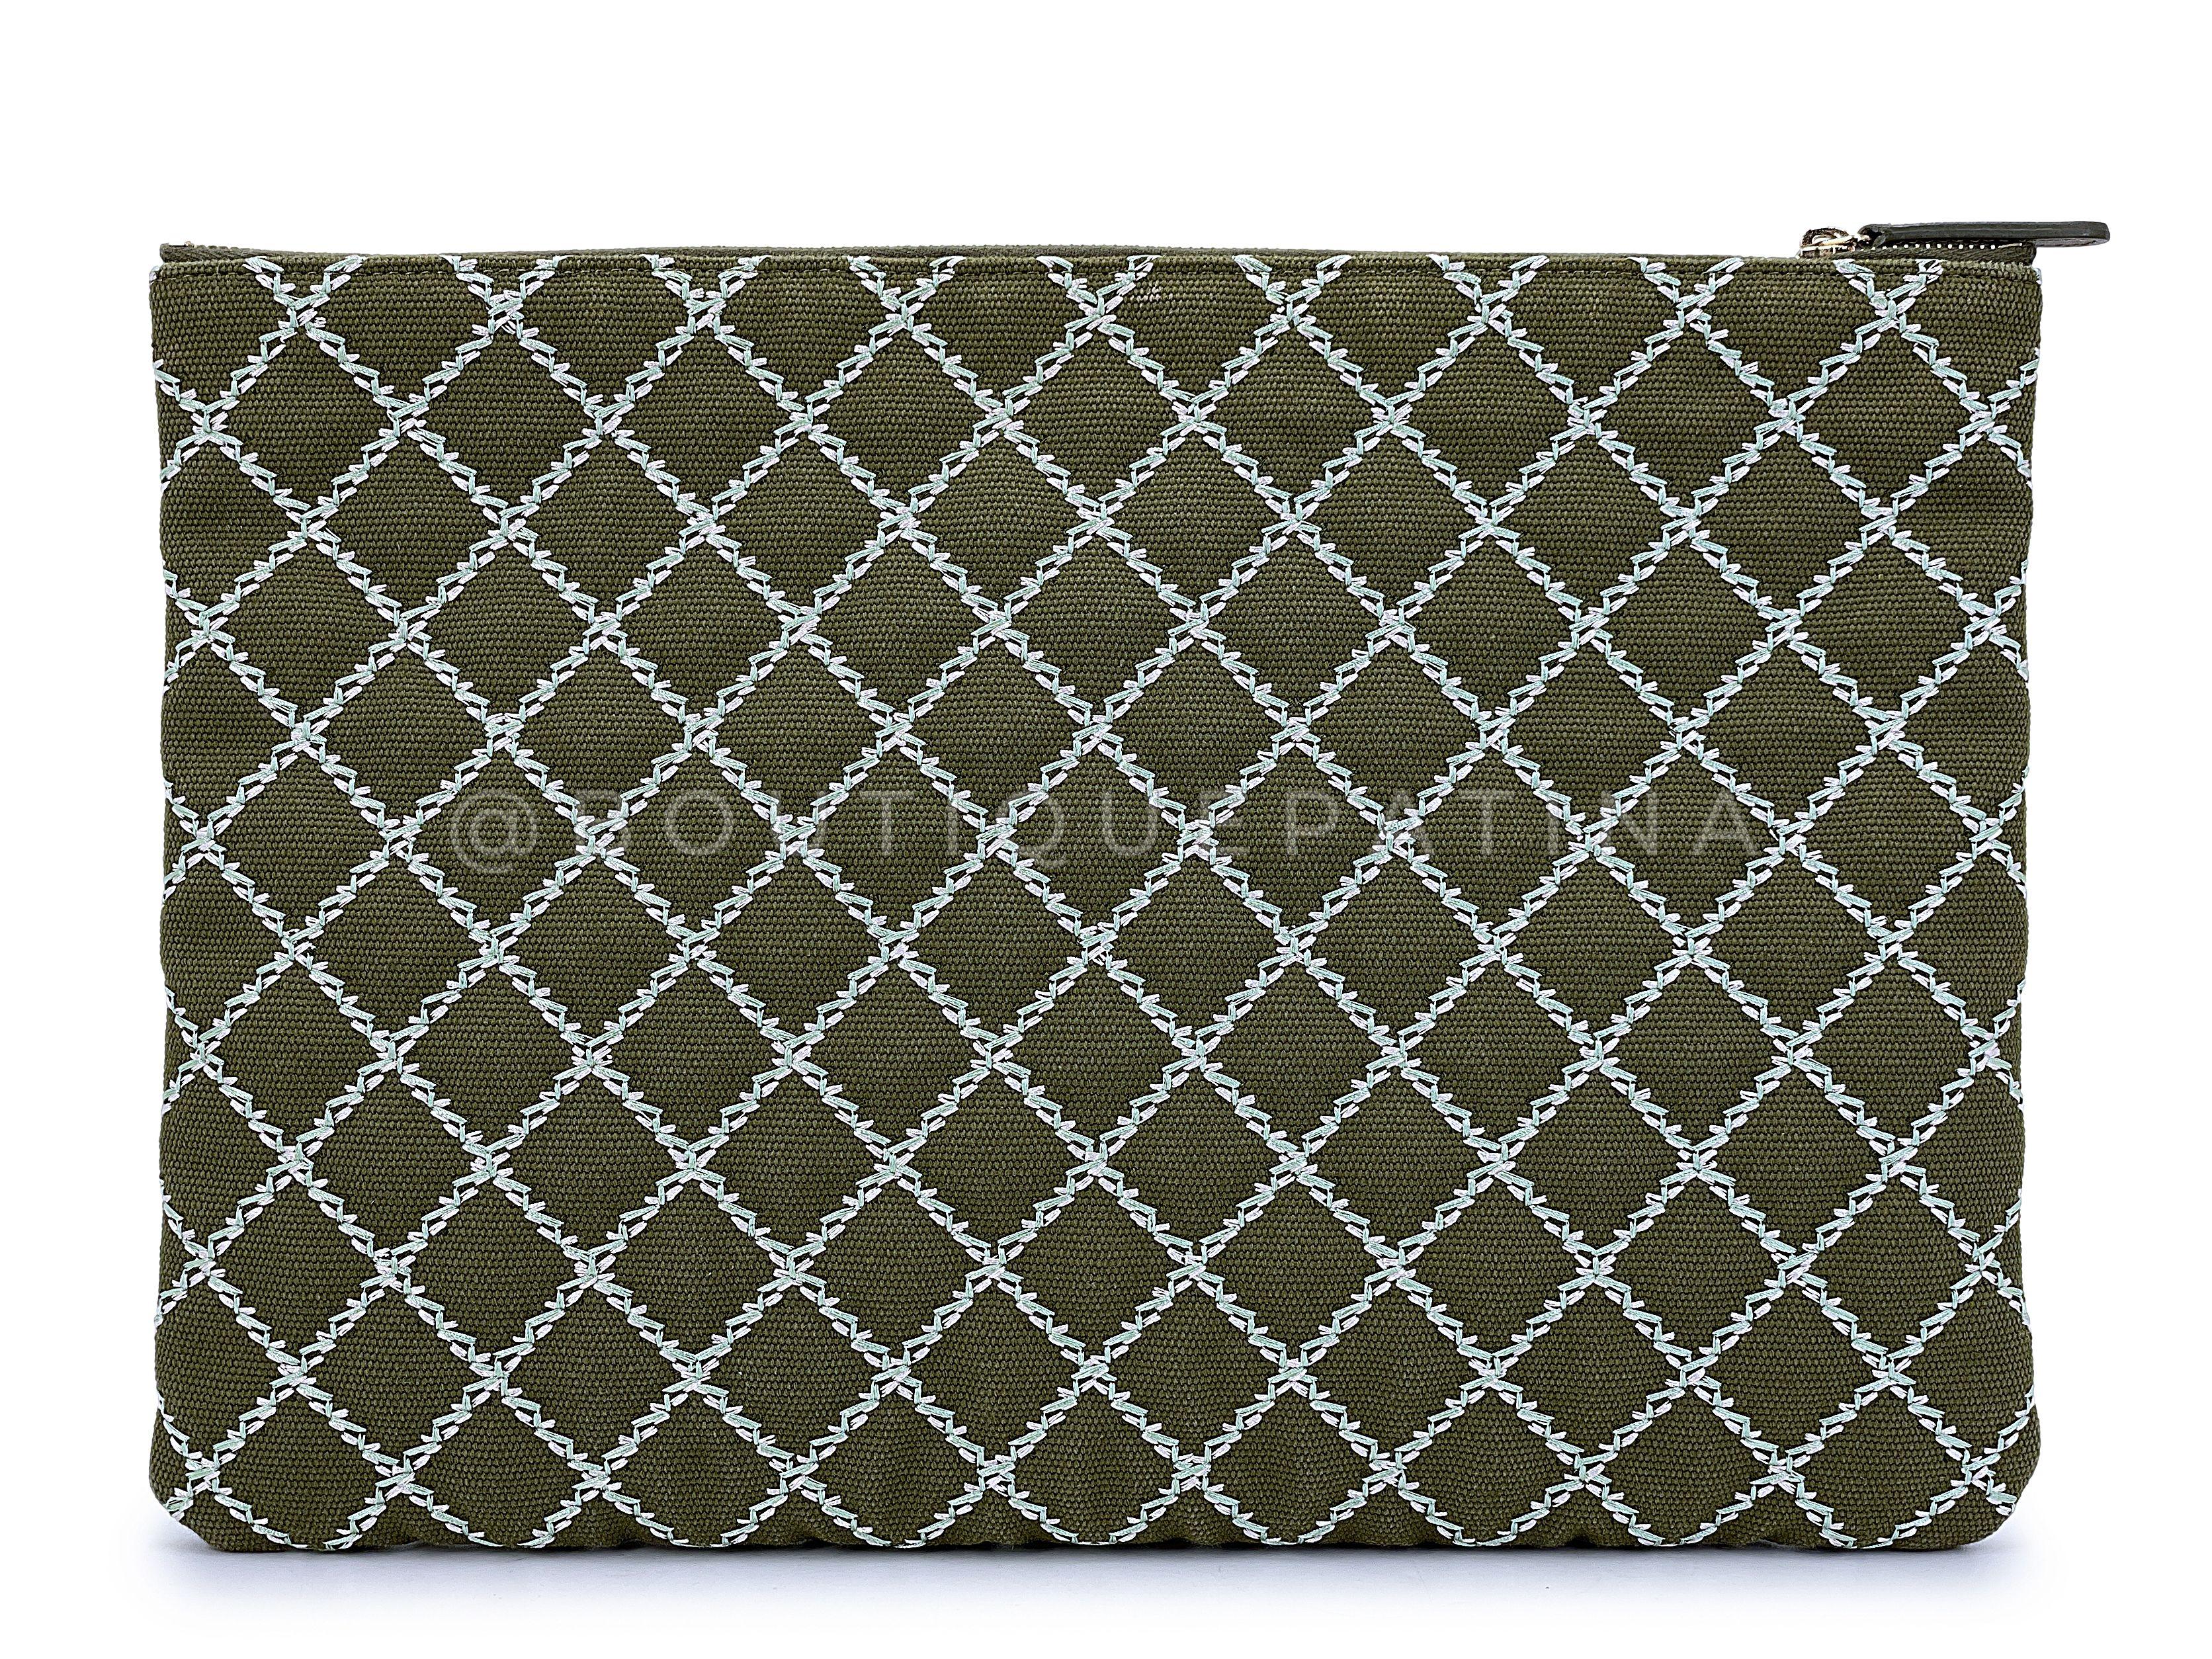 Store item: 67899
A delightful o case / large zip clutch in a green khaki canvas with white contrast stitching is this Chanel Khaki Green Contrast Stitch CC Large O Case Clutch Bag. 

With a fluffy fringe large center CC logo. 

In Green canvas and